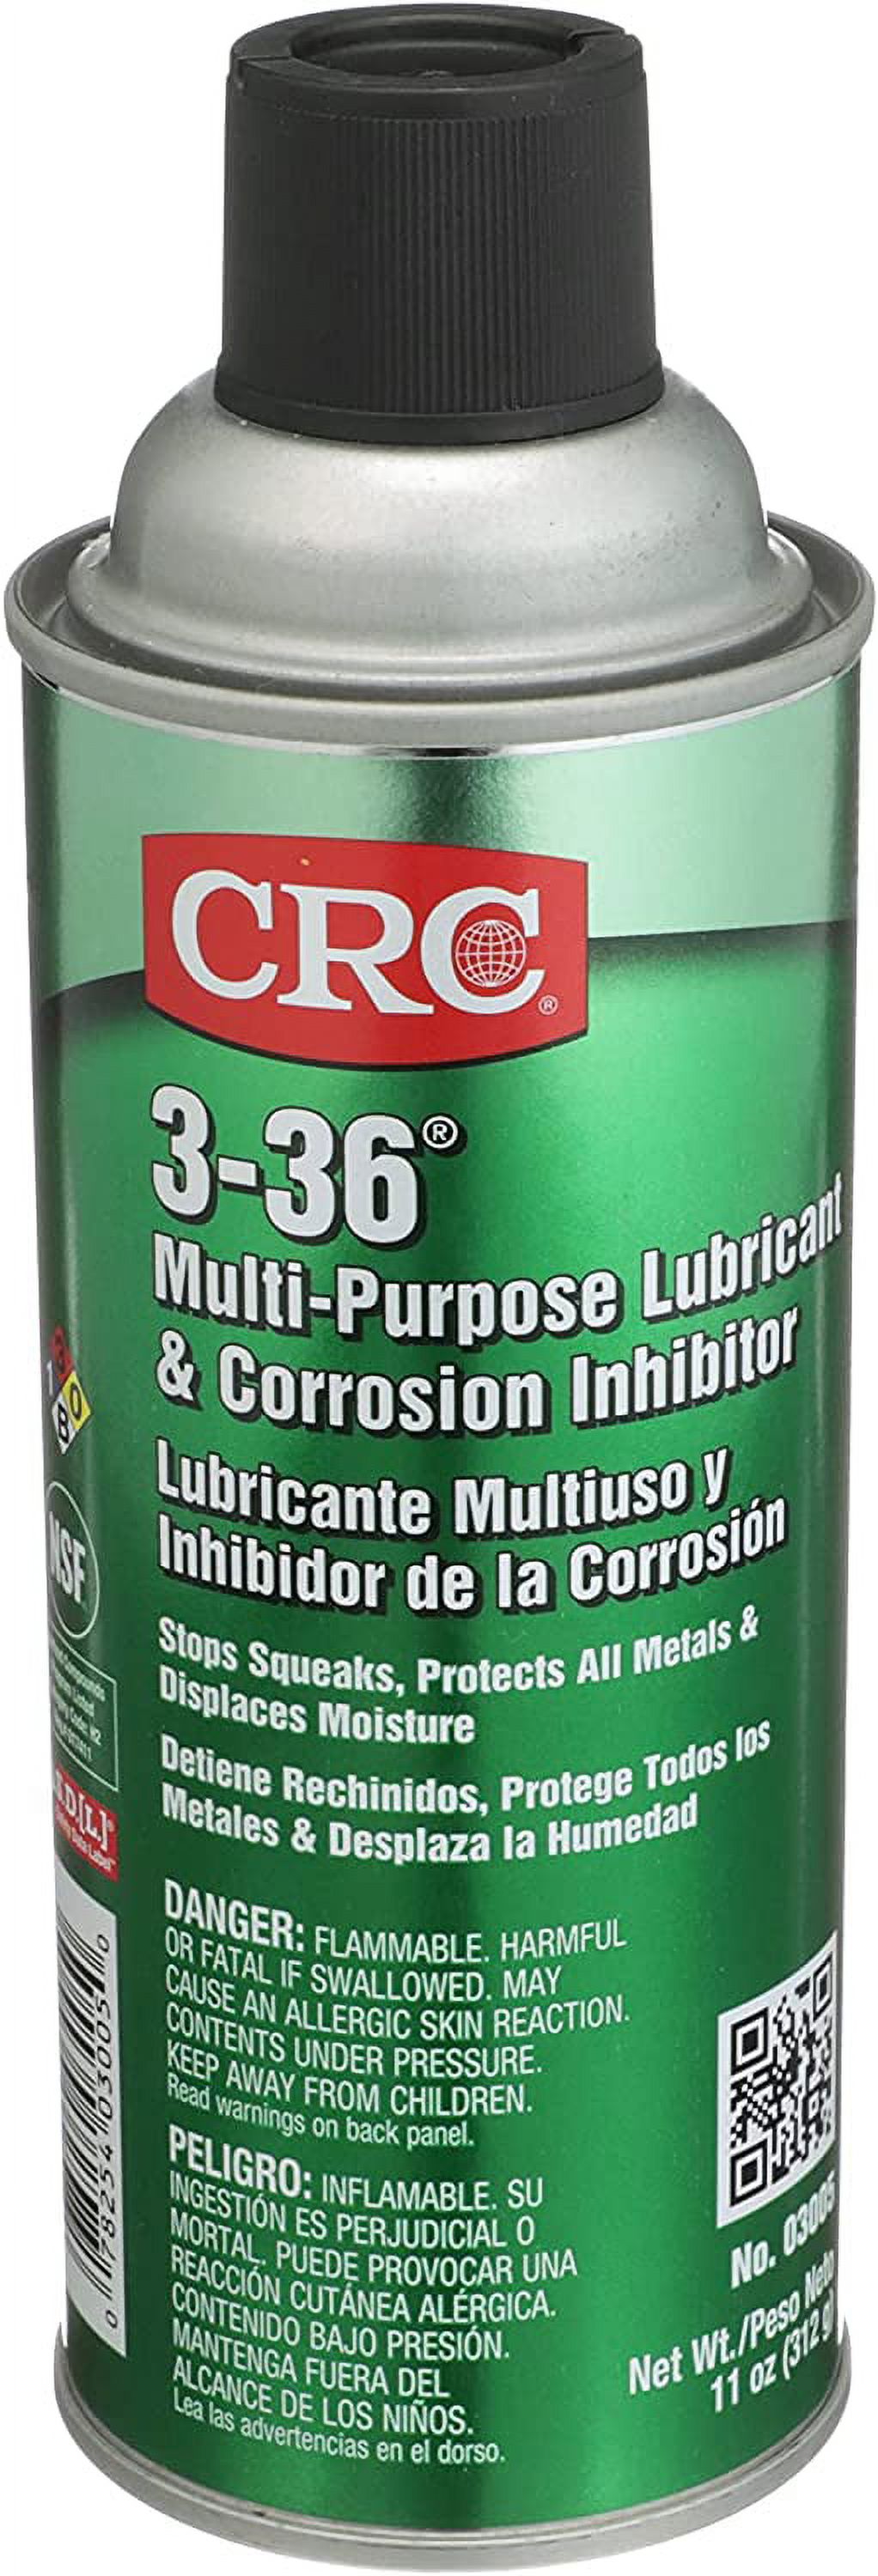 CRC 3-36 Multi-Purpose Lubricant and Corrosion Inhibitor, 11 oz Aerosol Can, Clear/Blue/Green - image 2 of 10